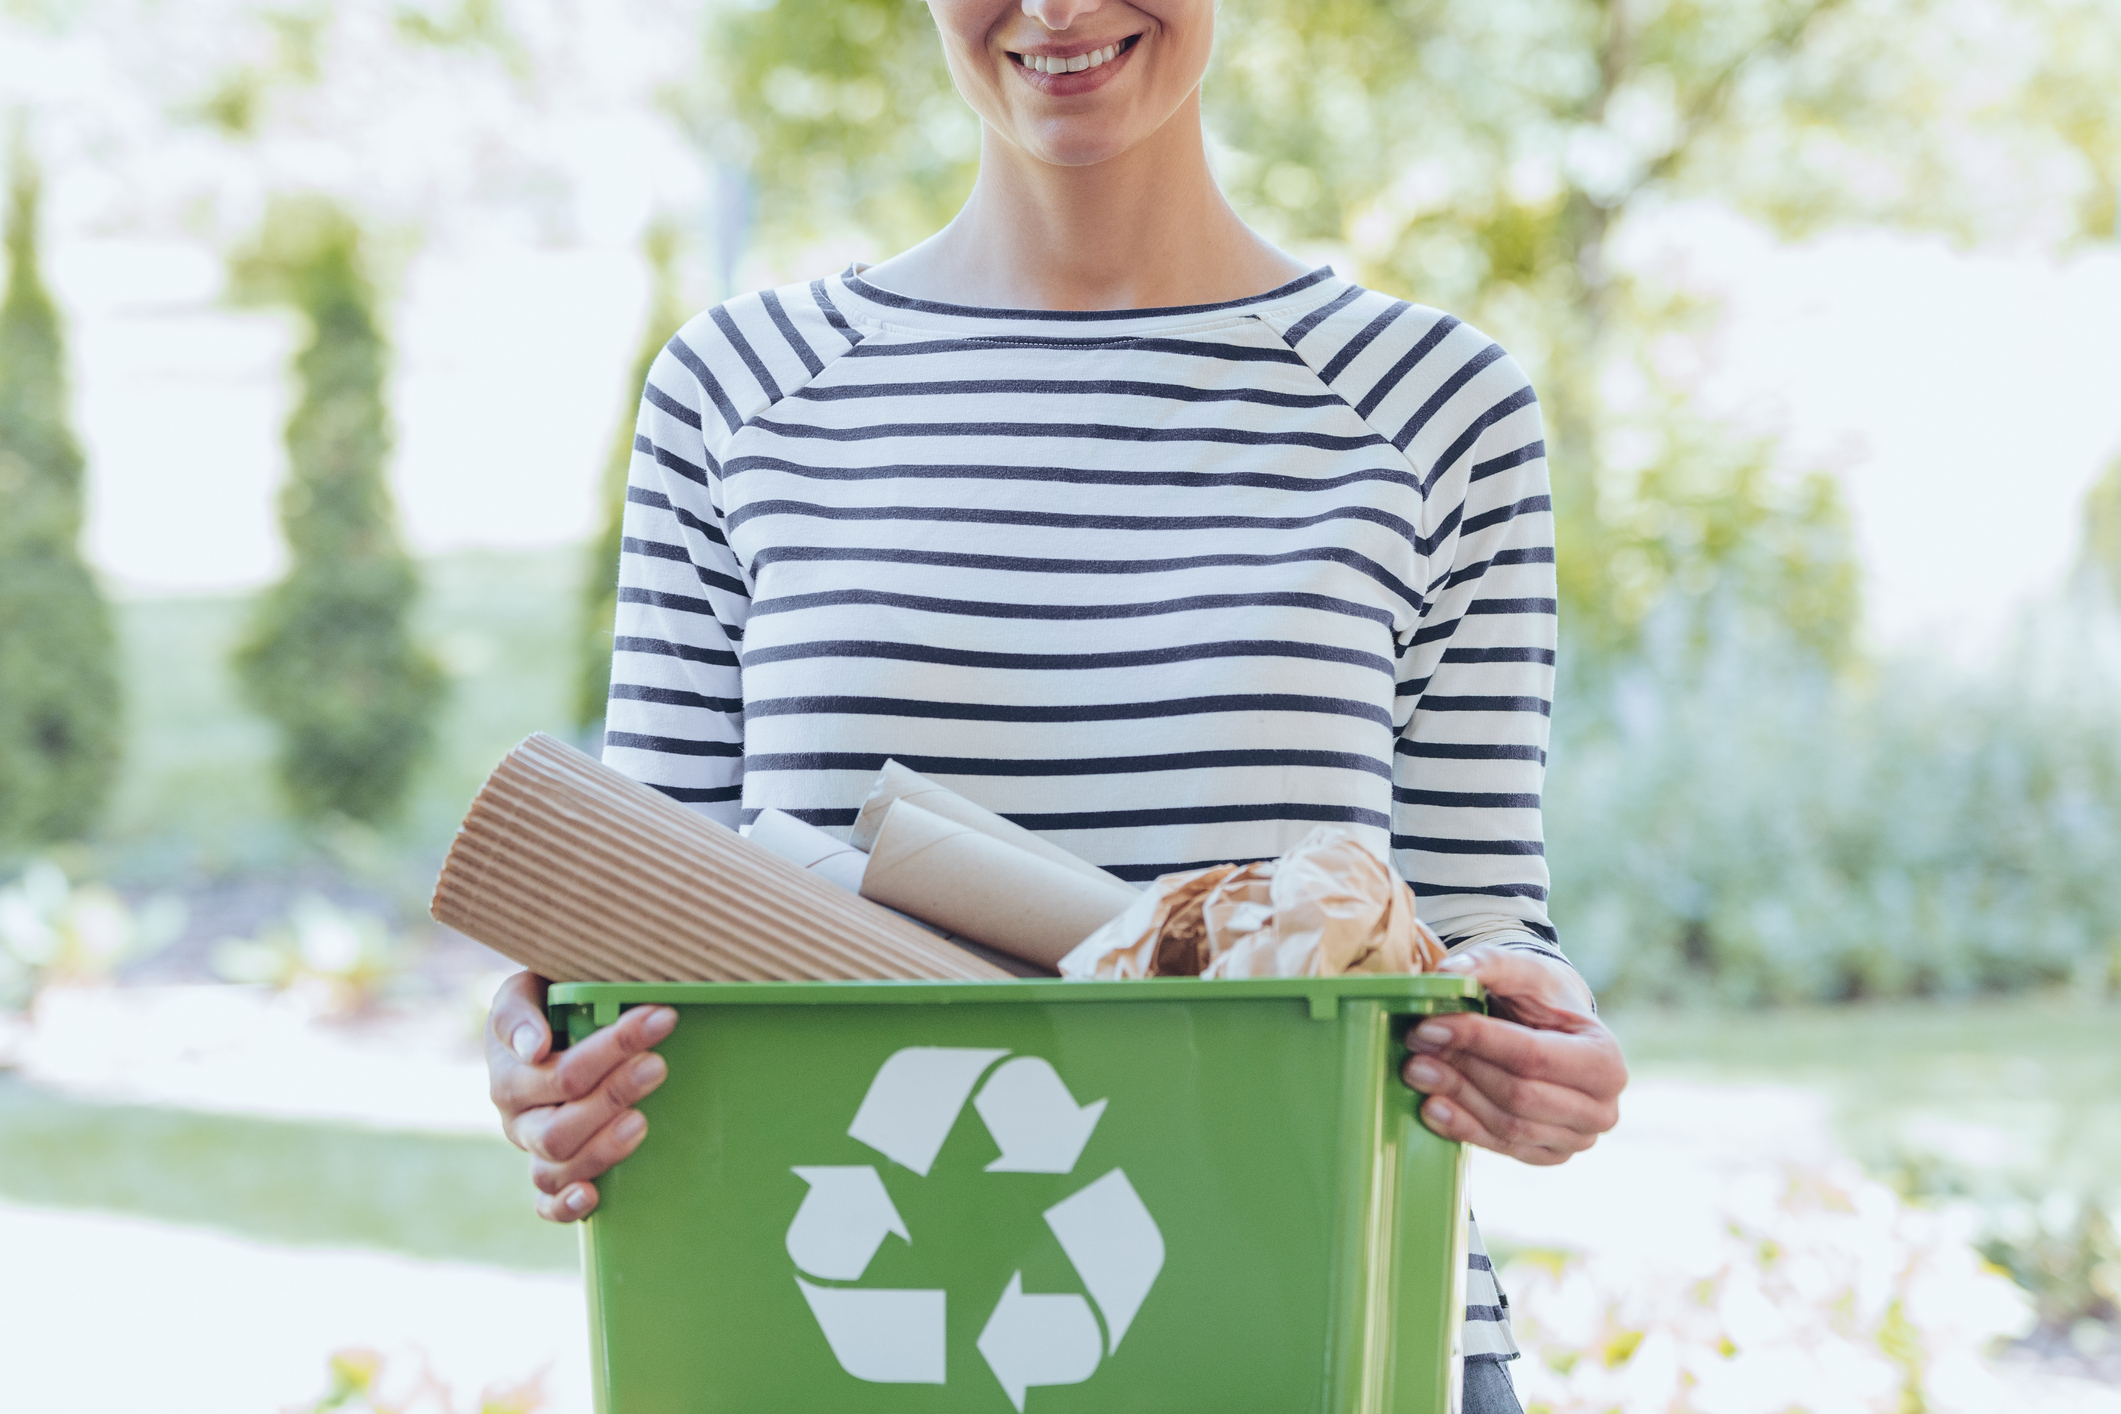 An image of a woman recycling